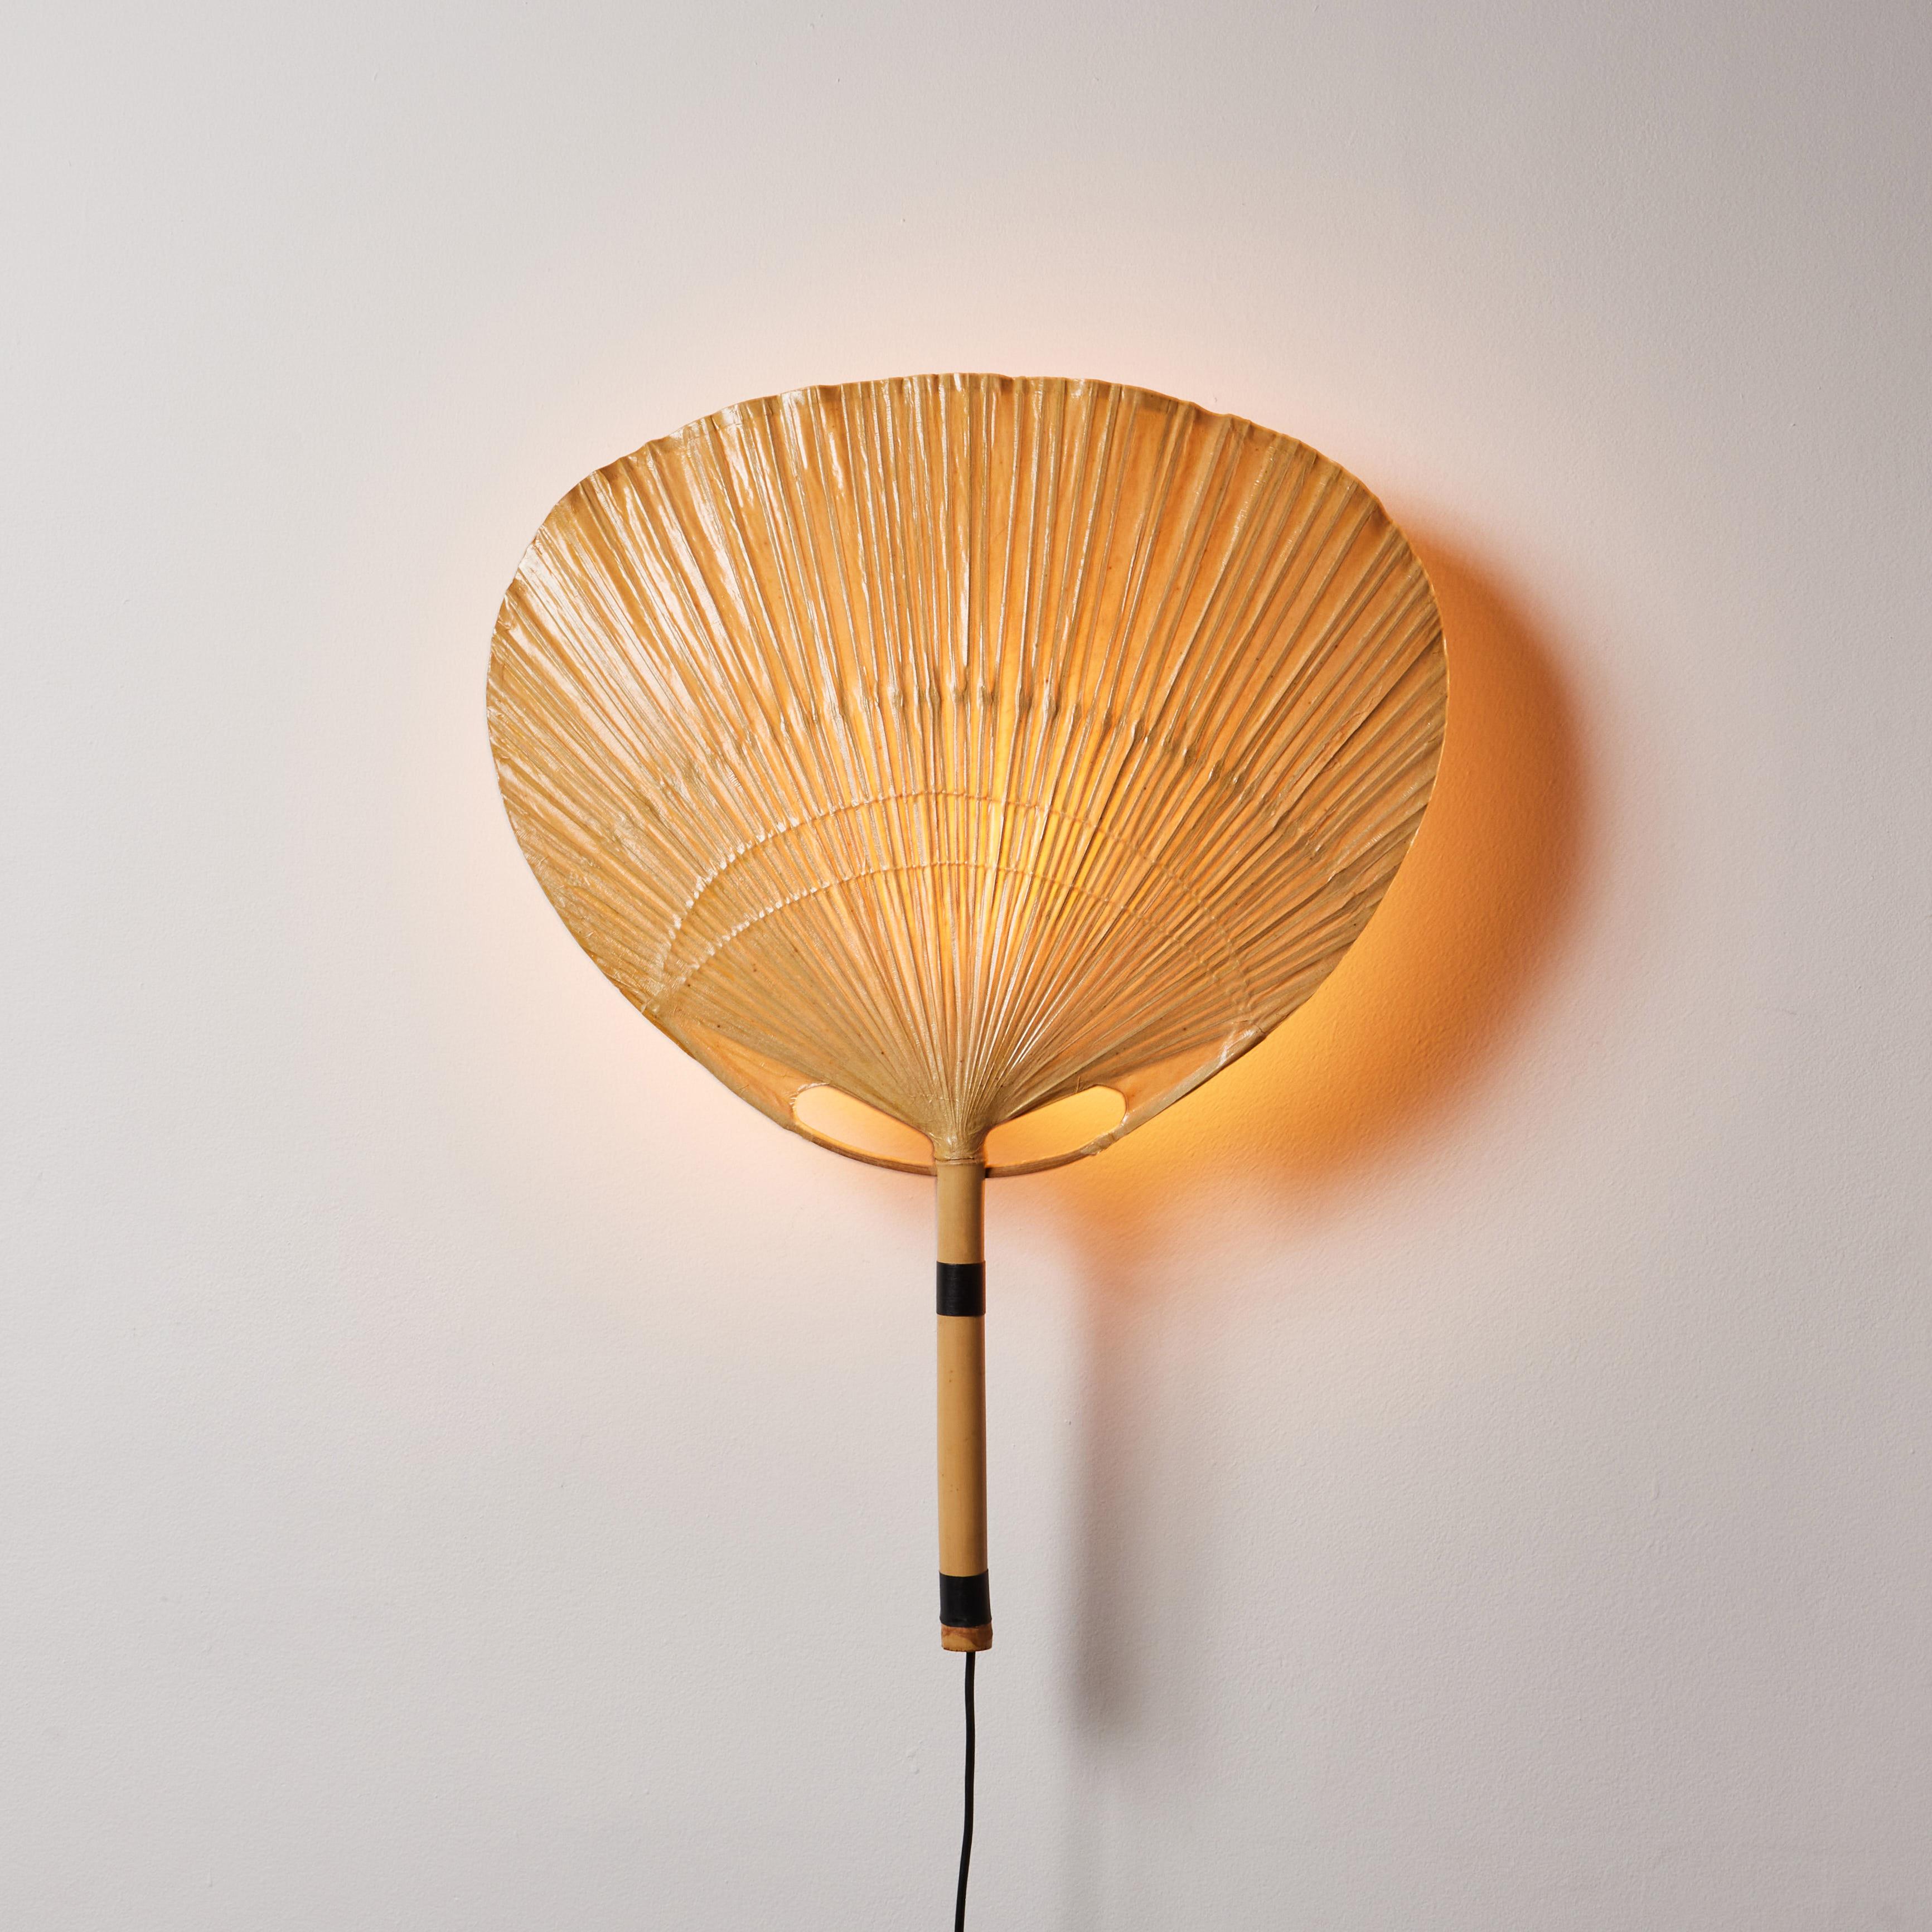 Uchiwa wall light by Ingo Maurer. Designed and manufactured in Germany, circa 1970s. Bamboo, rice paper. Original European cord. Each light takes one E27 40w maximum bulb. Bulbs provided as a one time courtesy.